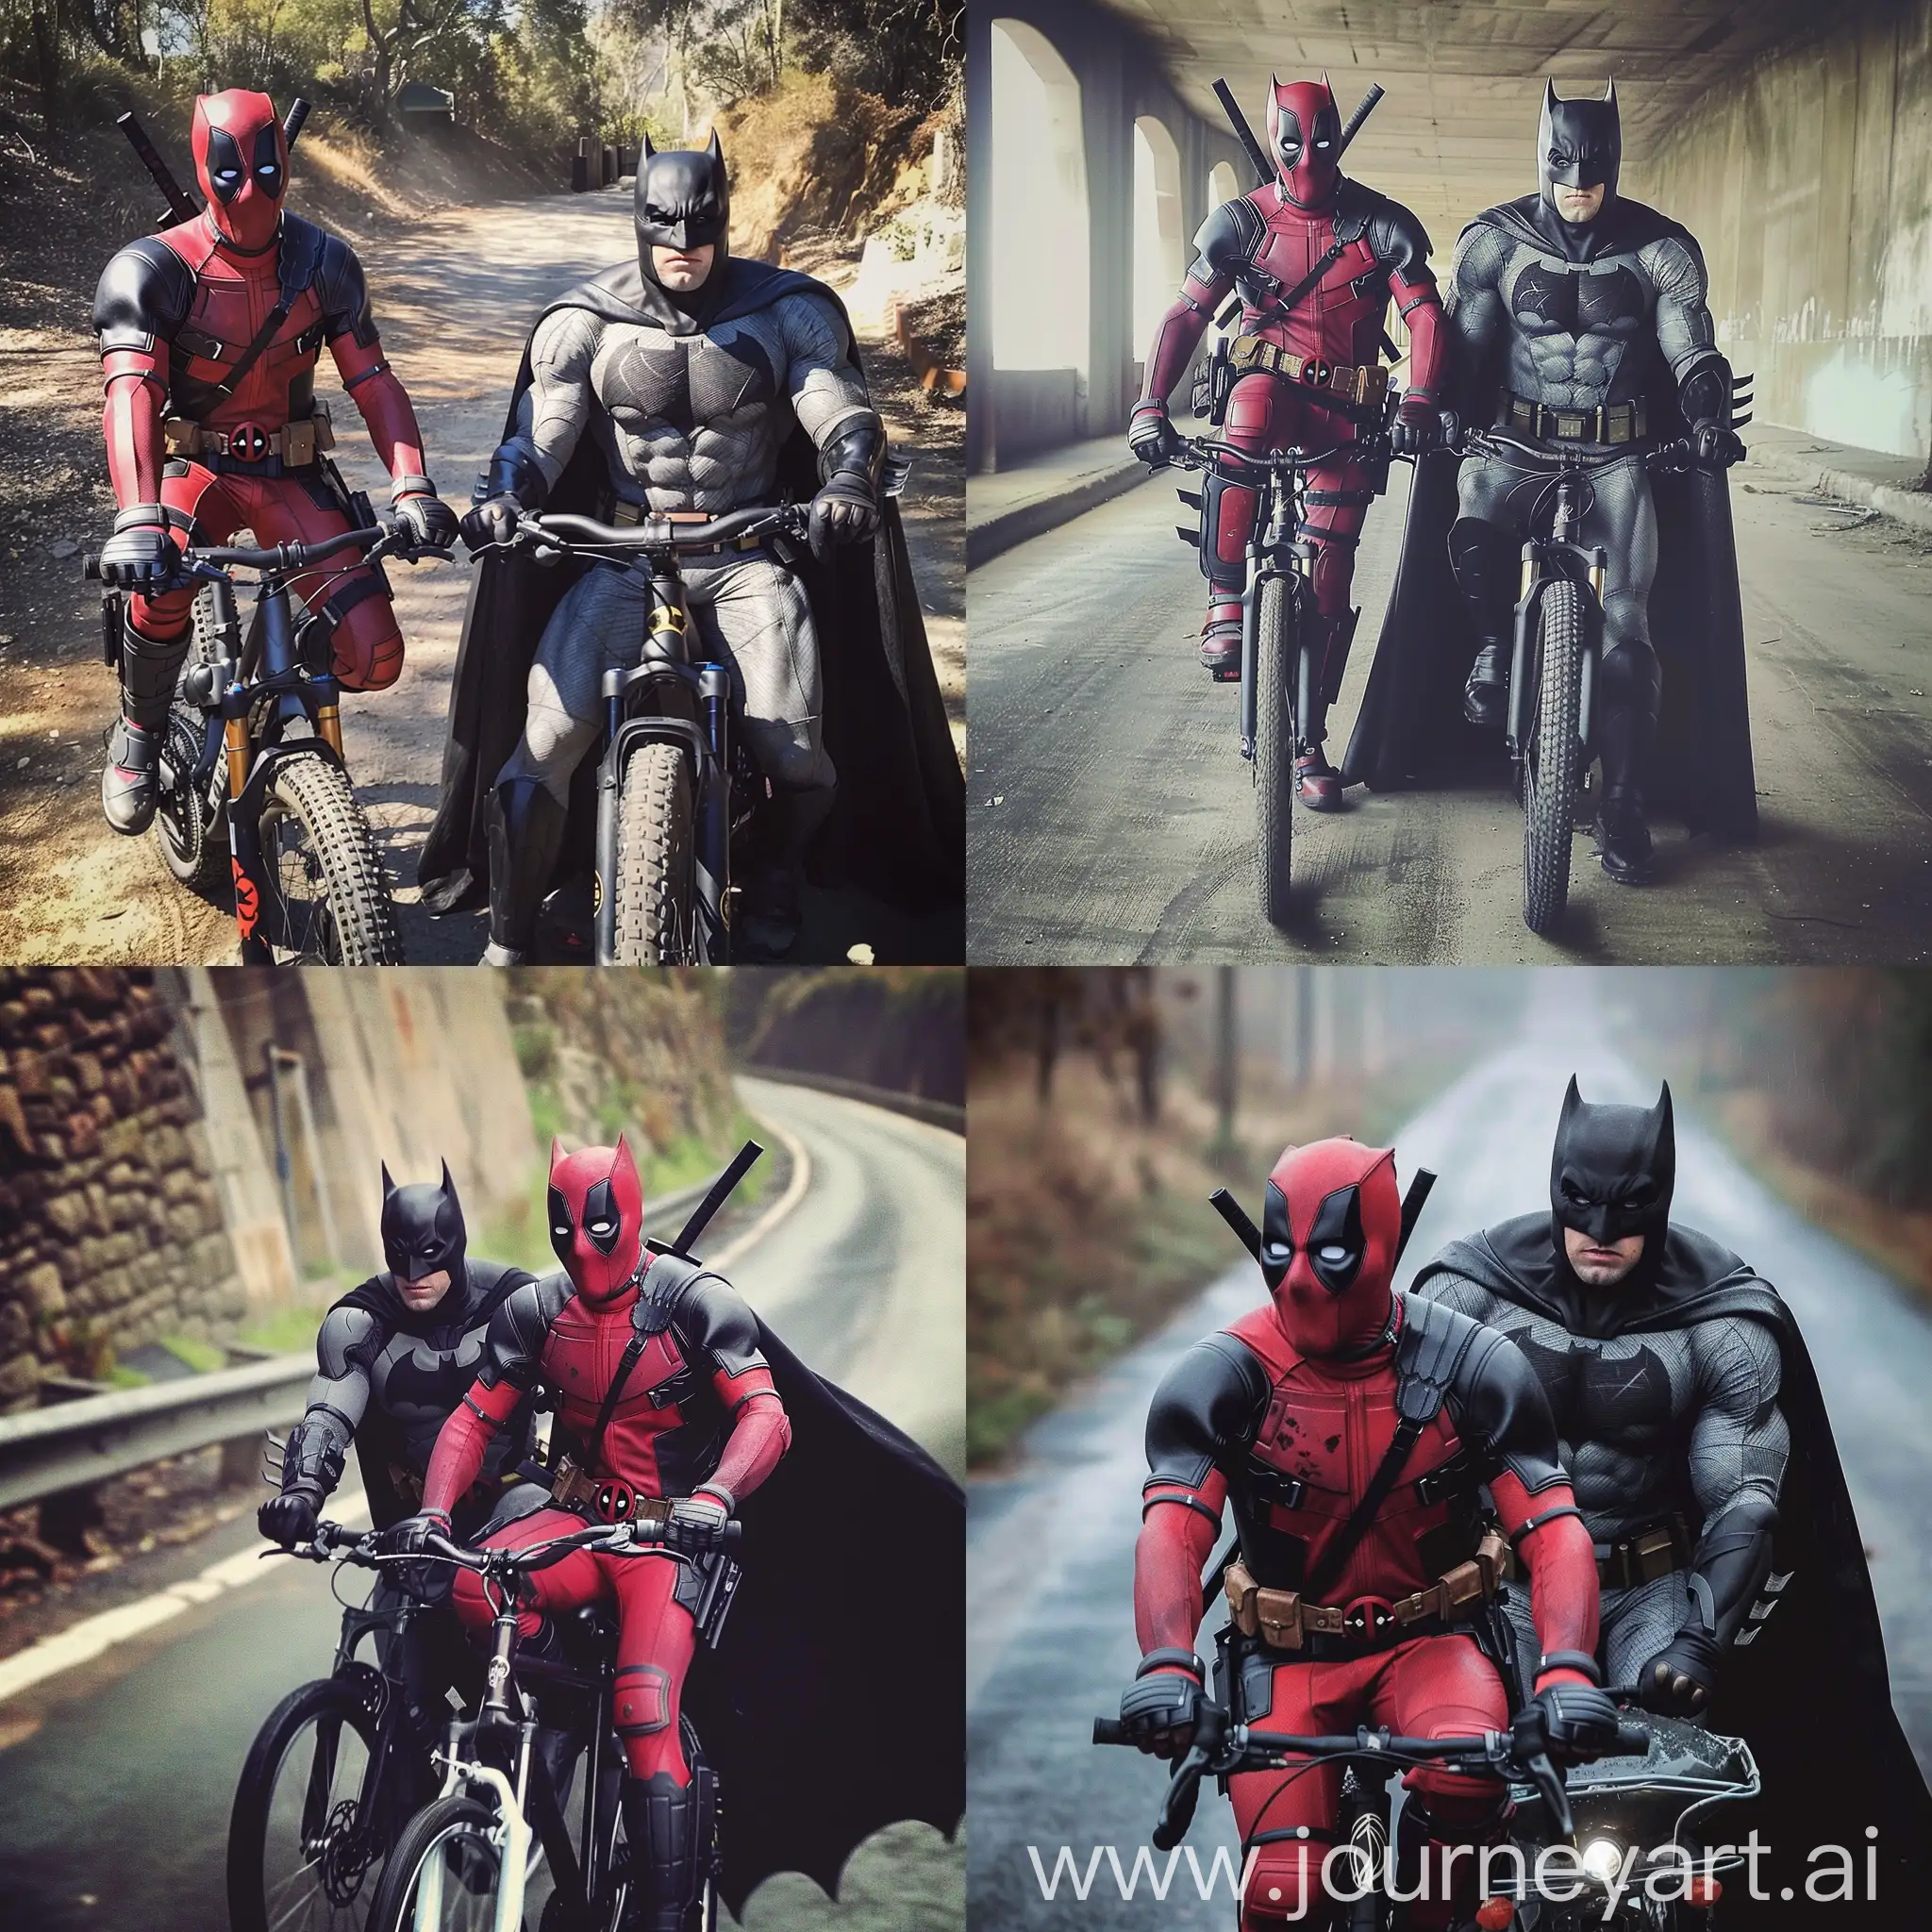 Deadpool-and-Batman-Riding-Motorcycle-Together-in-Dynamic-Action-Scene